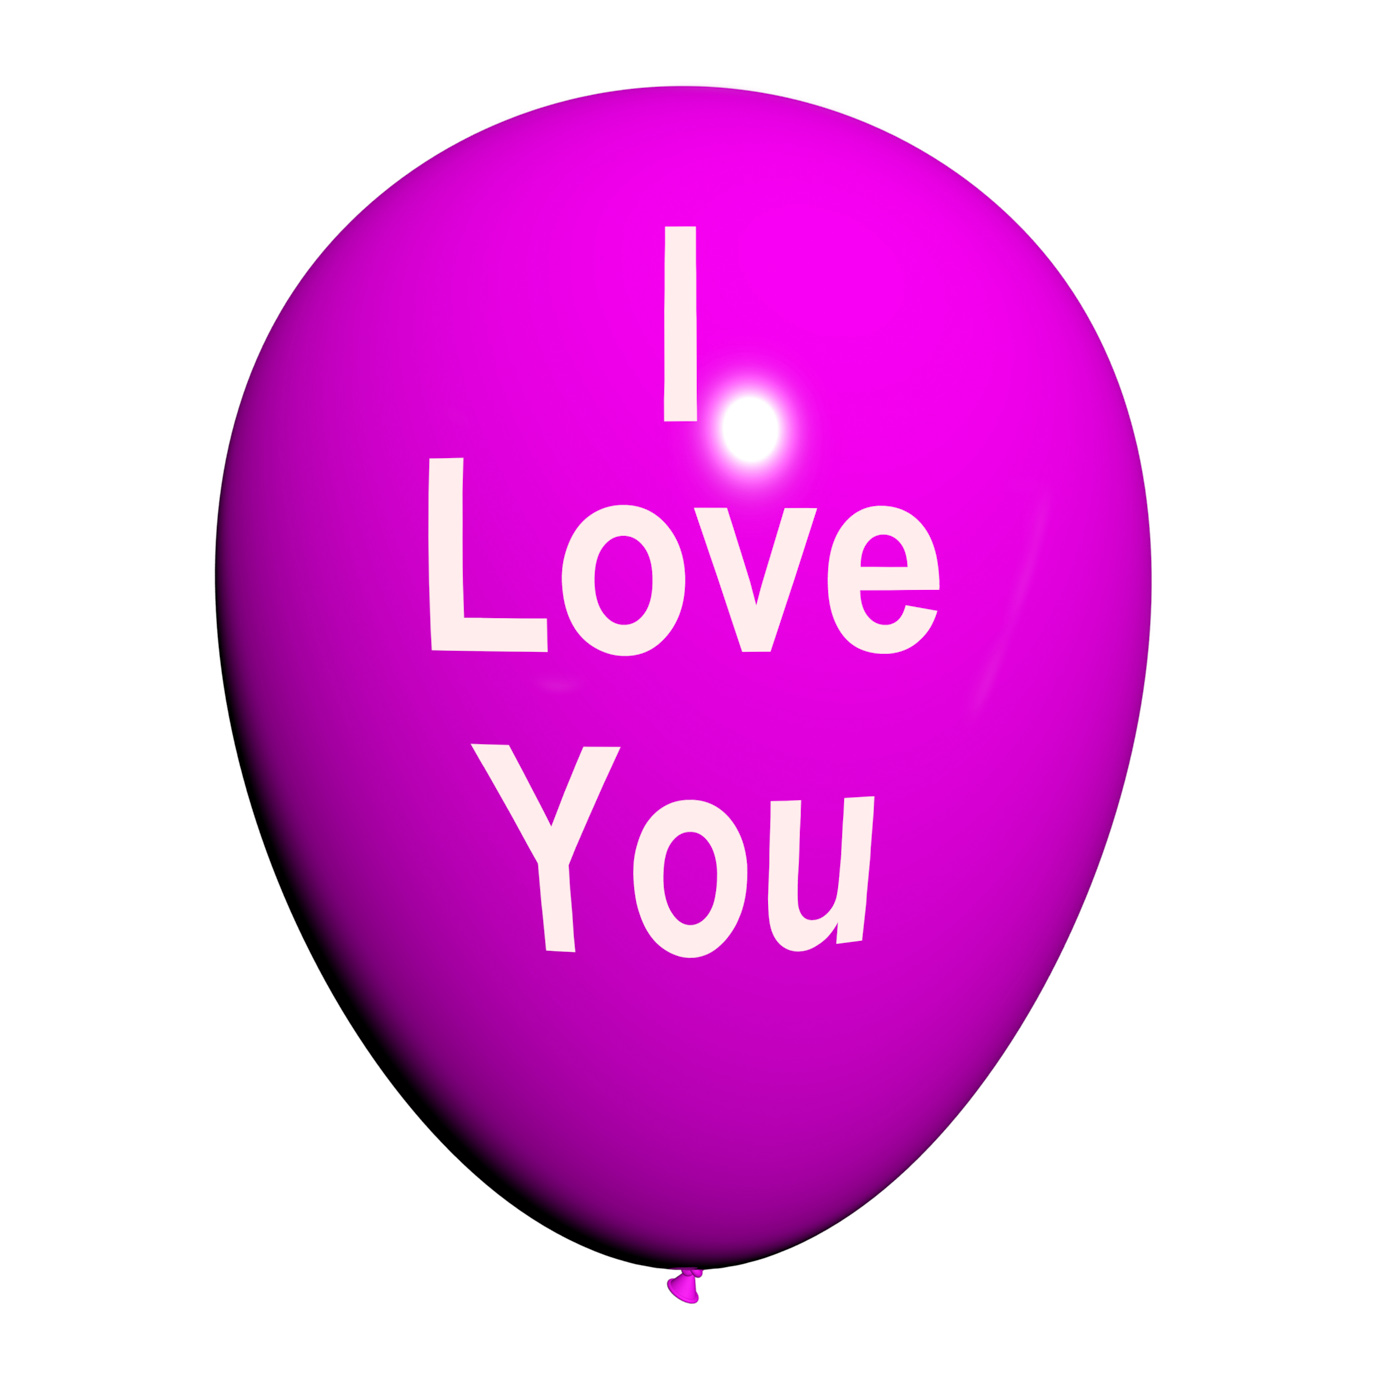 I love you balloon represents lovers and couples photo